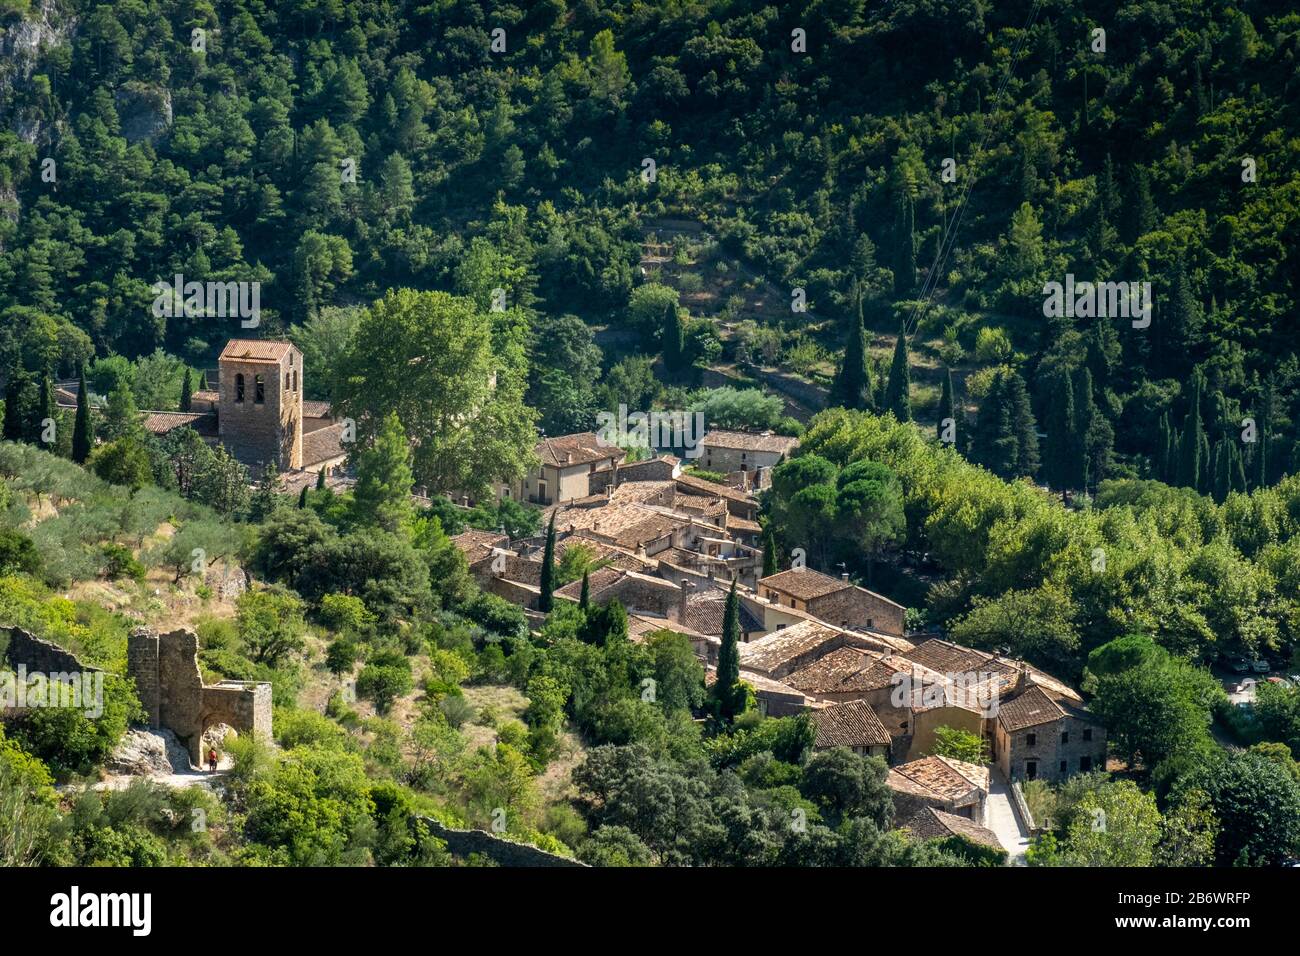 France, Occitanie, Herault, Gellone valley. Elevated view of the medieval village of Saint-Guilhem-le-Desert showing the Abbey of Gellone Stock Photo